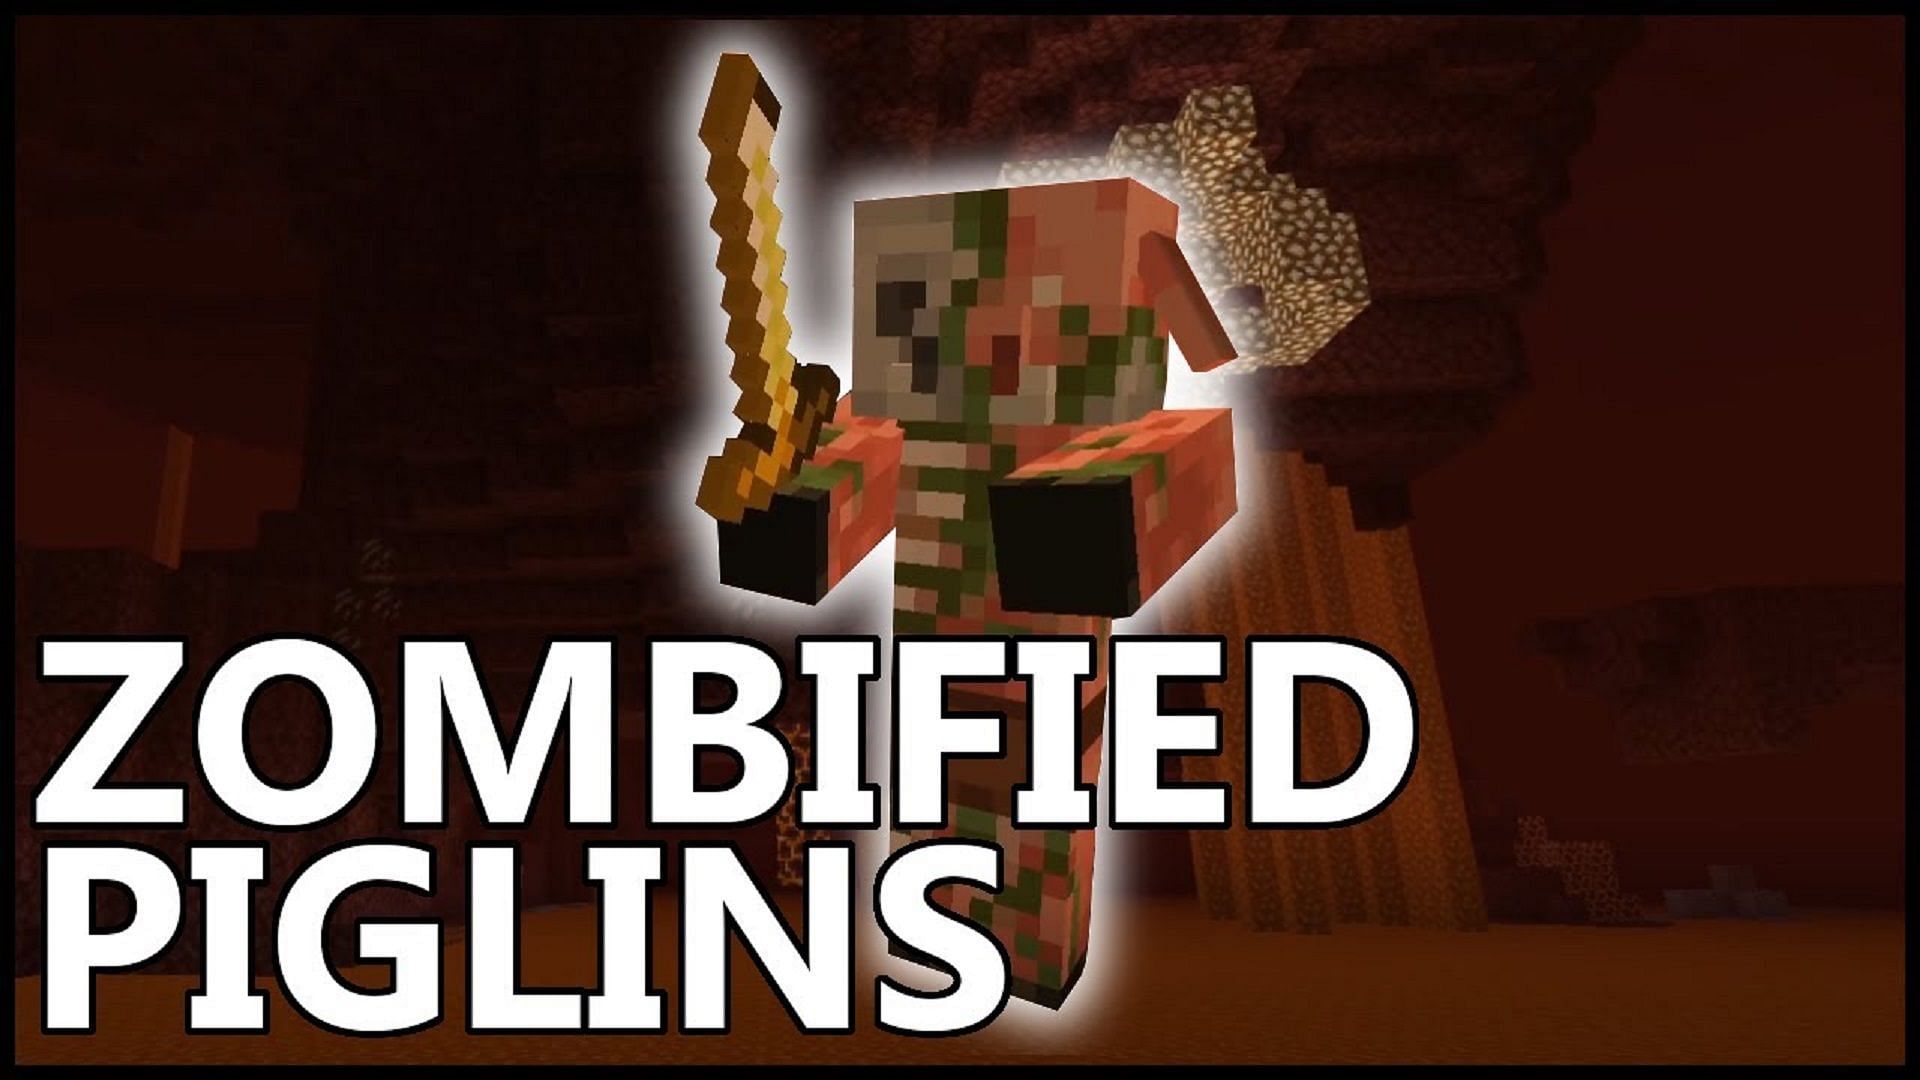 Zombified piglins have been a part of Minecraft